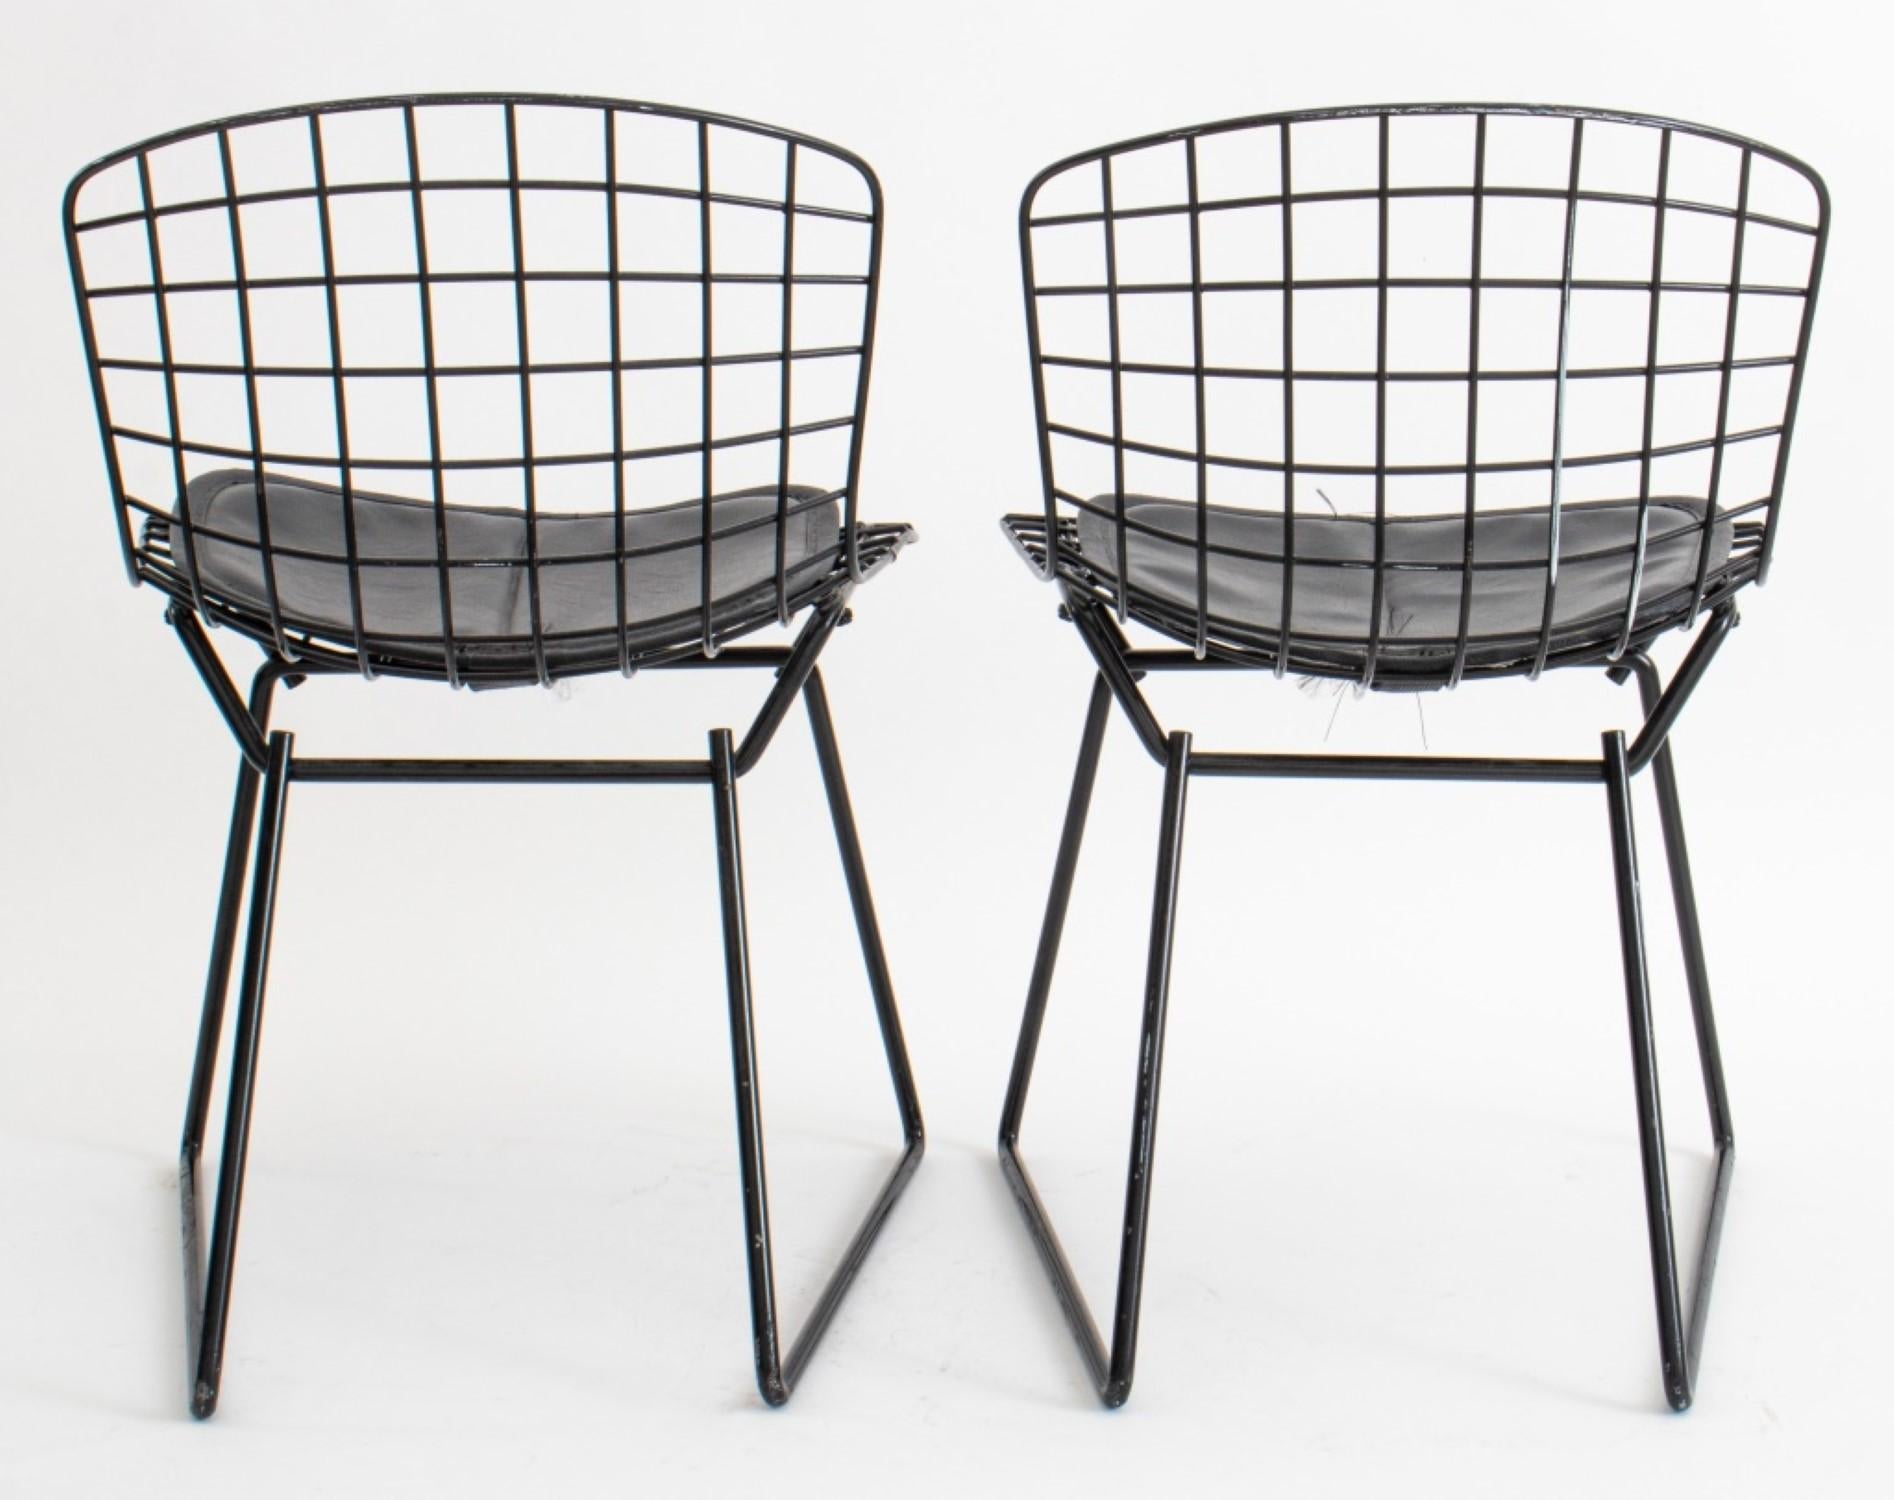 This charming pair of child's wire chairs by Harry Bertoia is a perfect way to introduce your child to the world of iconic design. Crafted from bent steel wire with comfortable leather seat pads, these chairs offer a blend of style, comfort, and